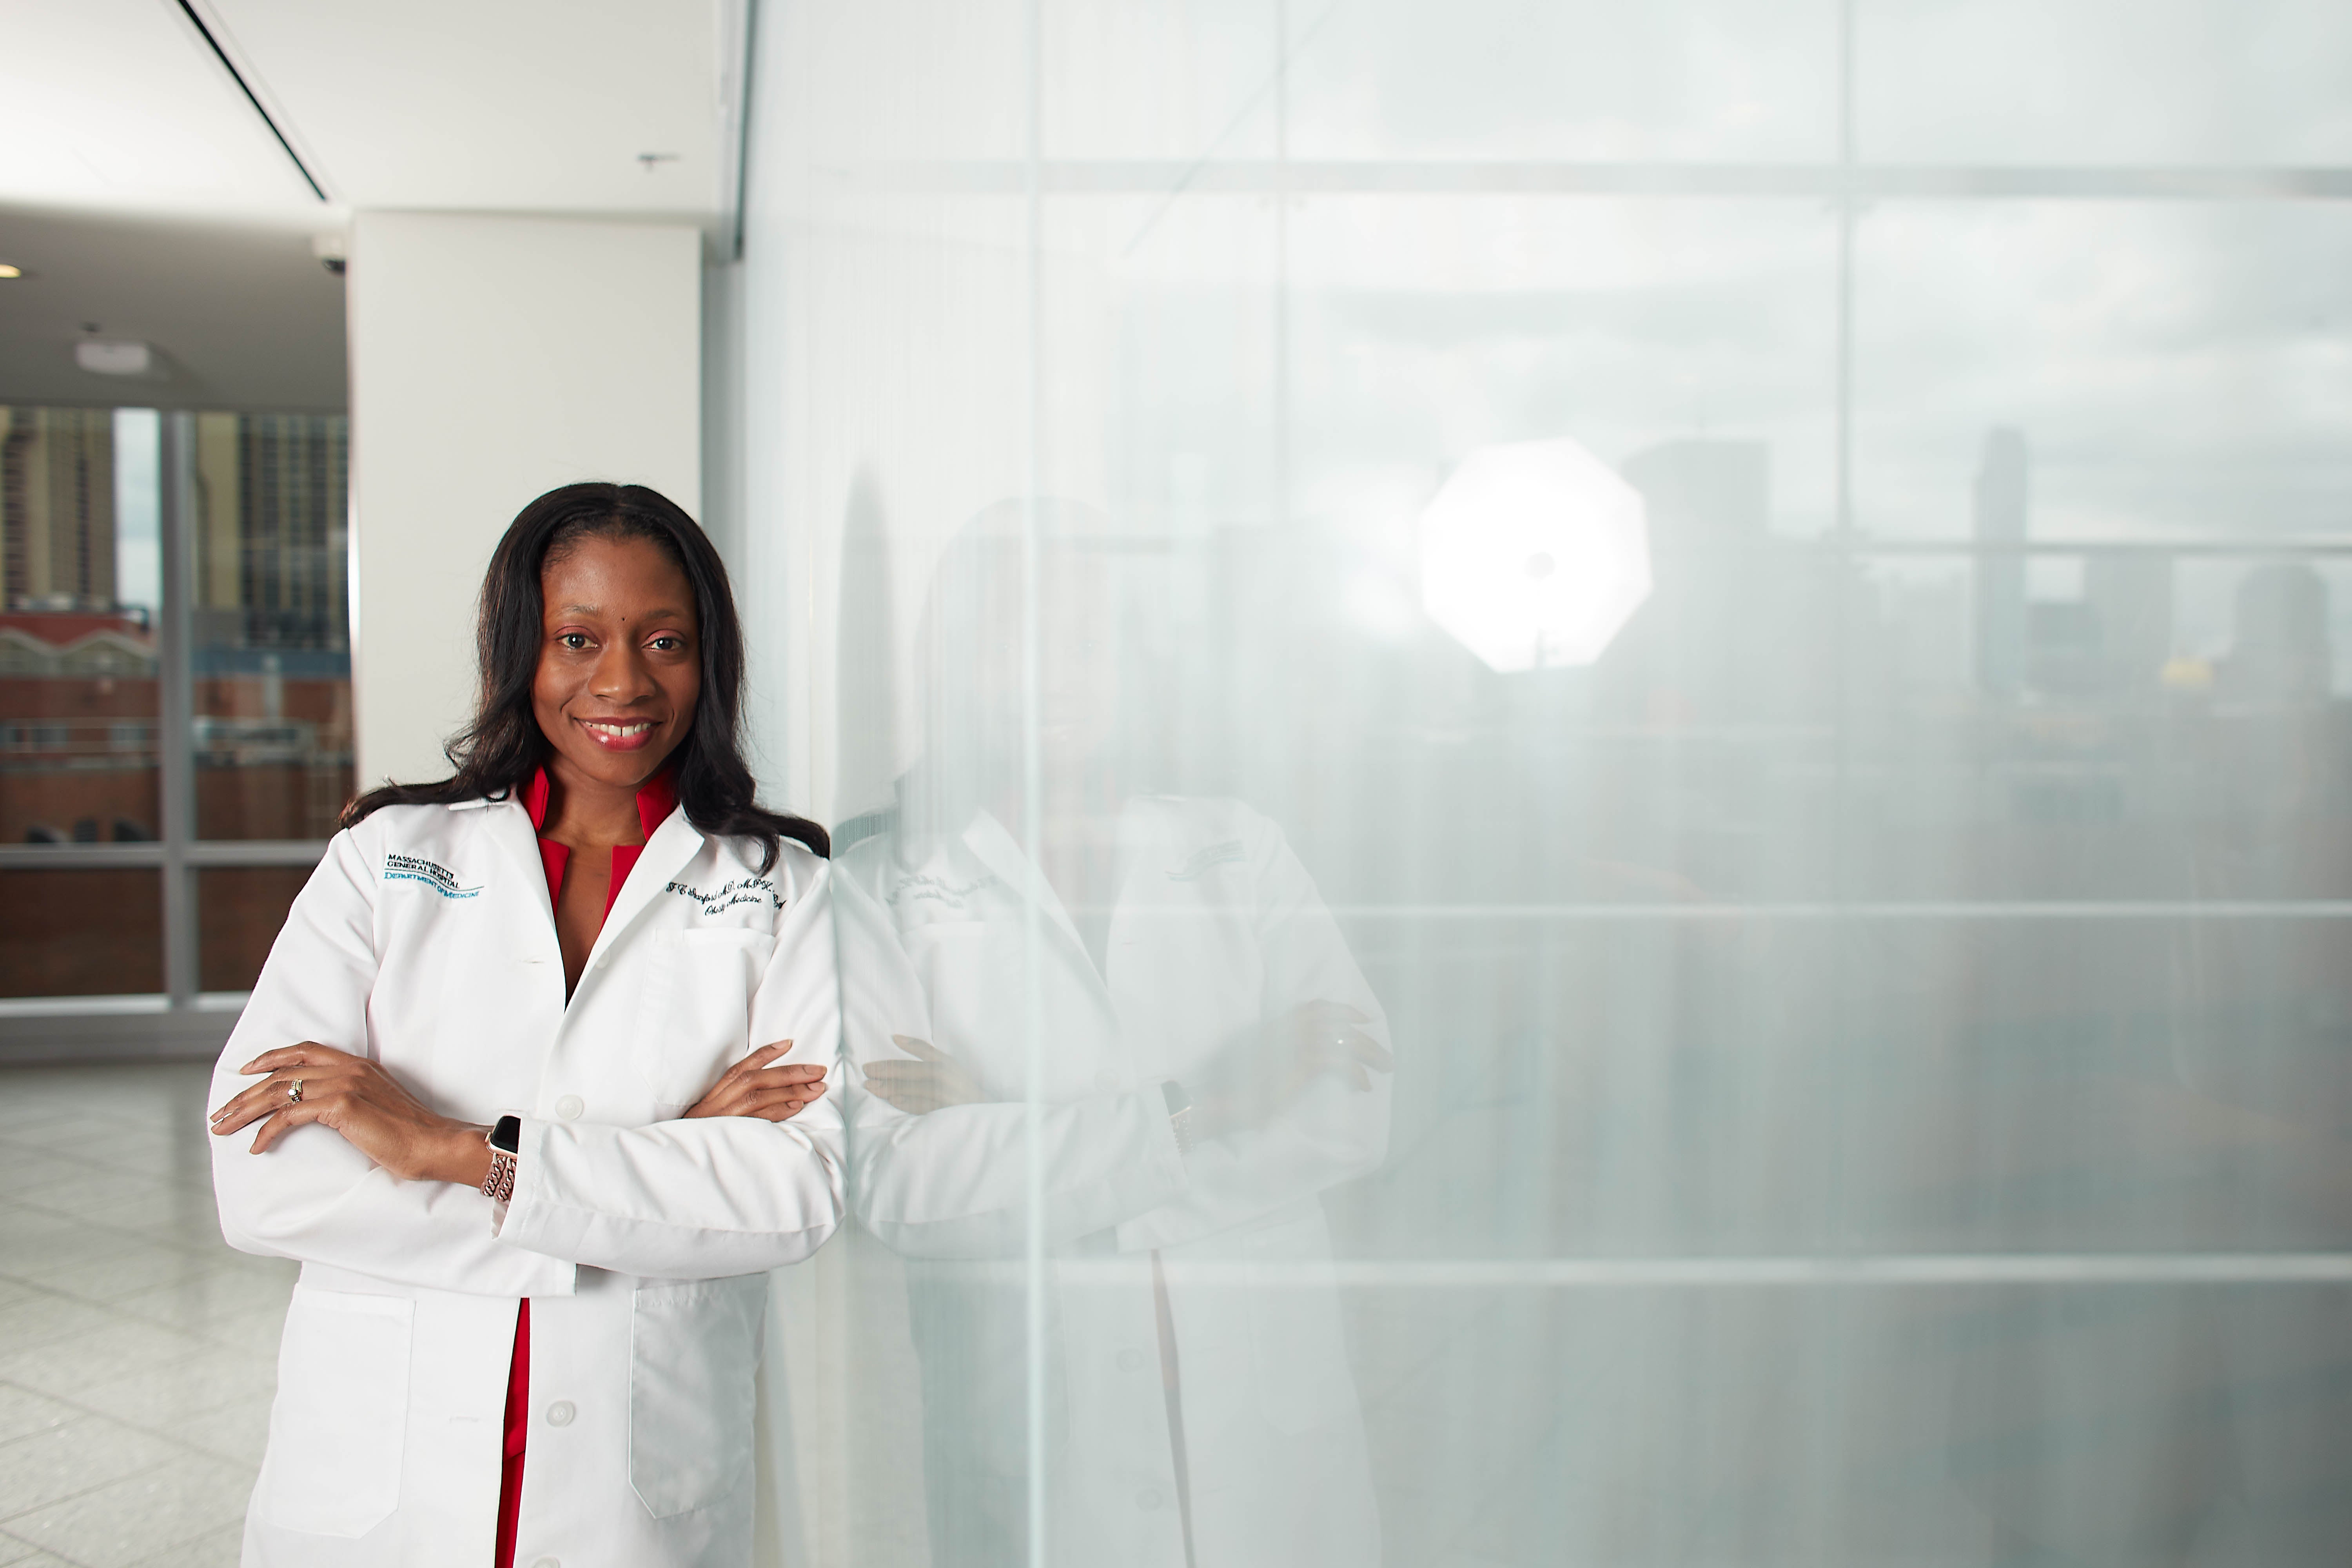 Fatima Cody Stanford in lab coat in white office hallway standing with arms crossed and leaning on reflective glass wall.